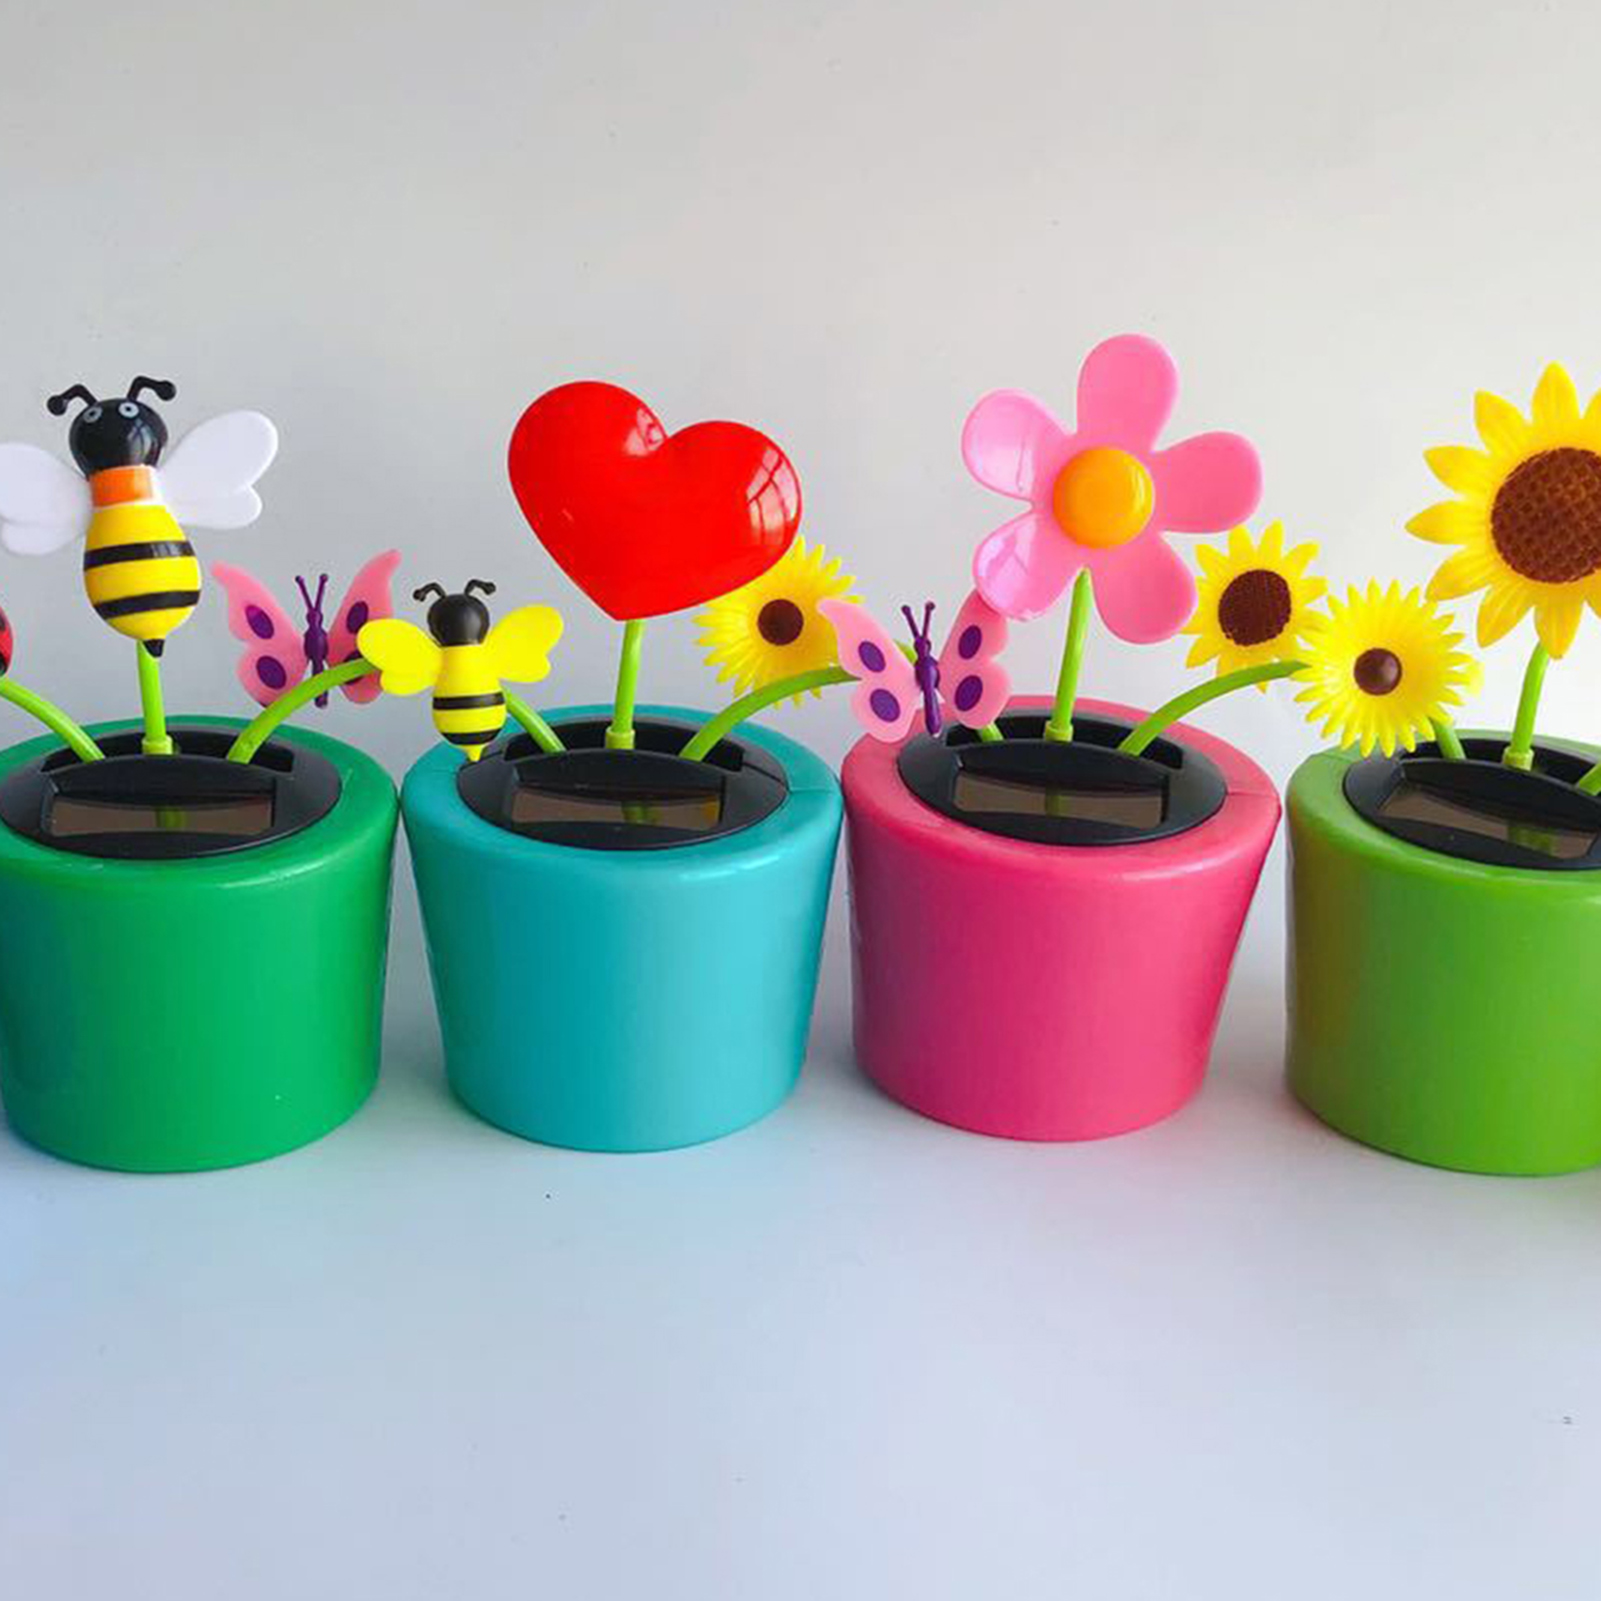 Cute Solar Power Flip Flap Flower Insect for Car Decoration Swing Dancing Flower Eco-Friendly Bobblehead Solar Dancing Flowers in Colorful Pots - image 2 of 8